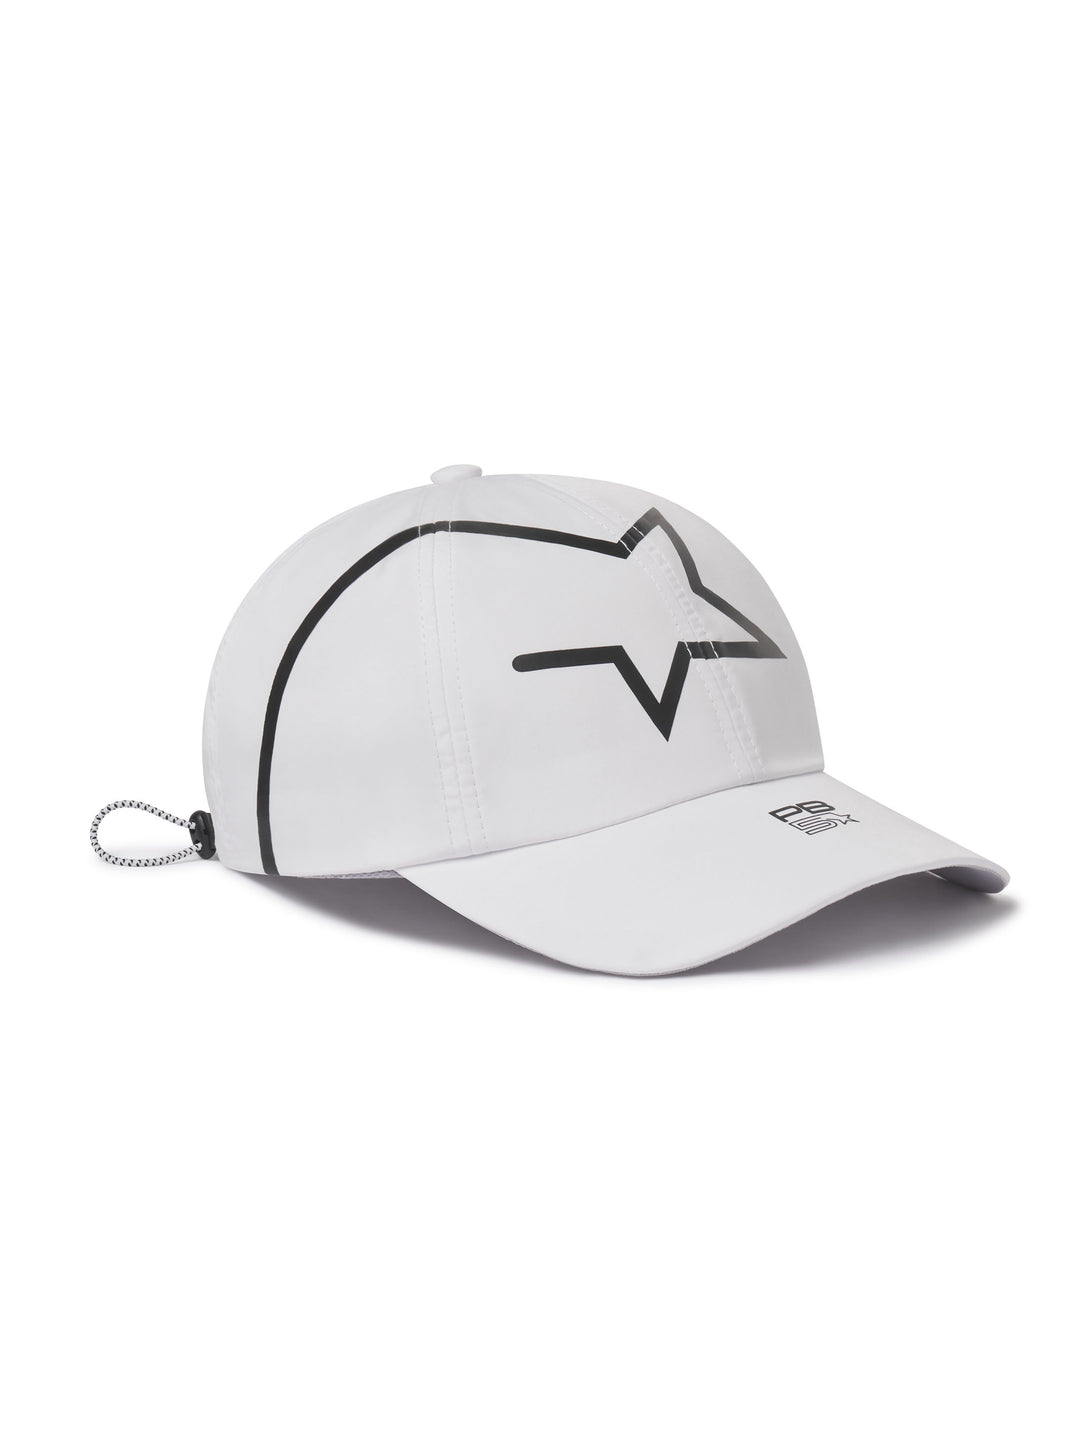 Stellar Cap side view in white with small logo on bill and large logo star on front of cap.